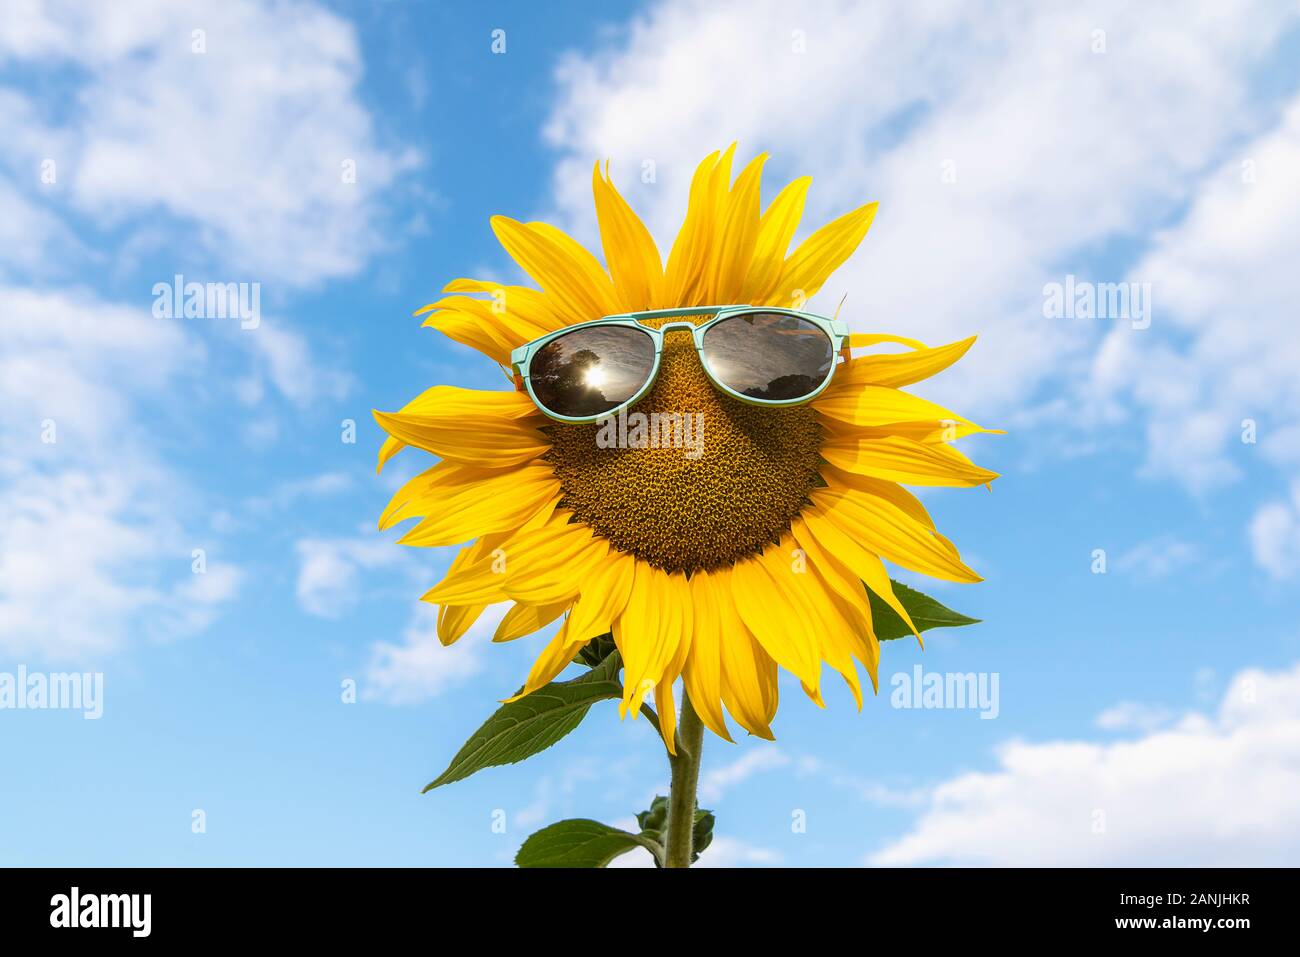 Funny sunflower with sunglasses against a blue summer sky. Single yellow flower with sunglasses. Summer vacation. Happy summer holiday. Cute sunflower Stock Photo